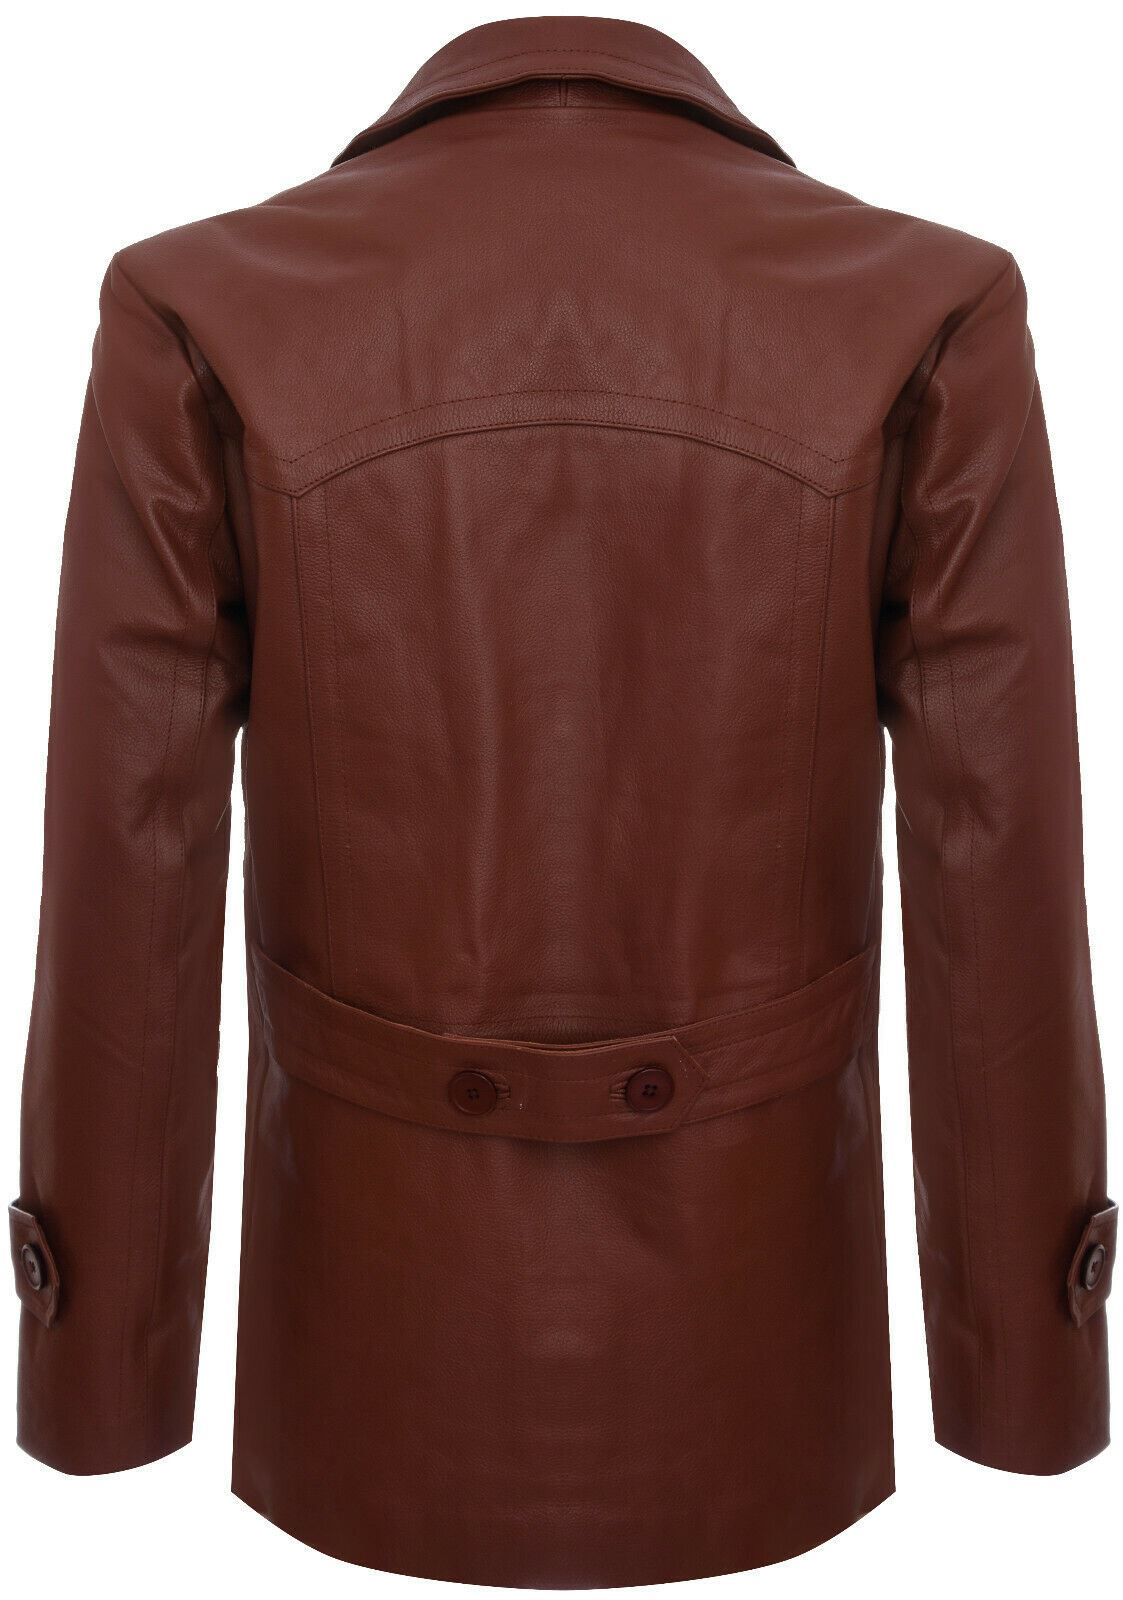 Mens Leather CowHide German Peacoat-Epping - Upperclass Fashions 